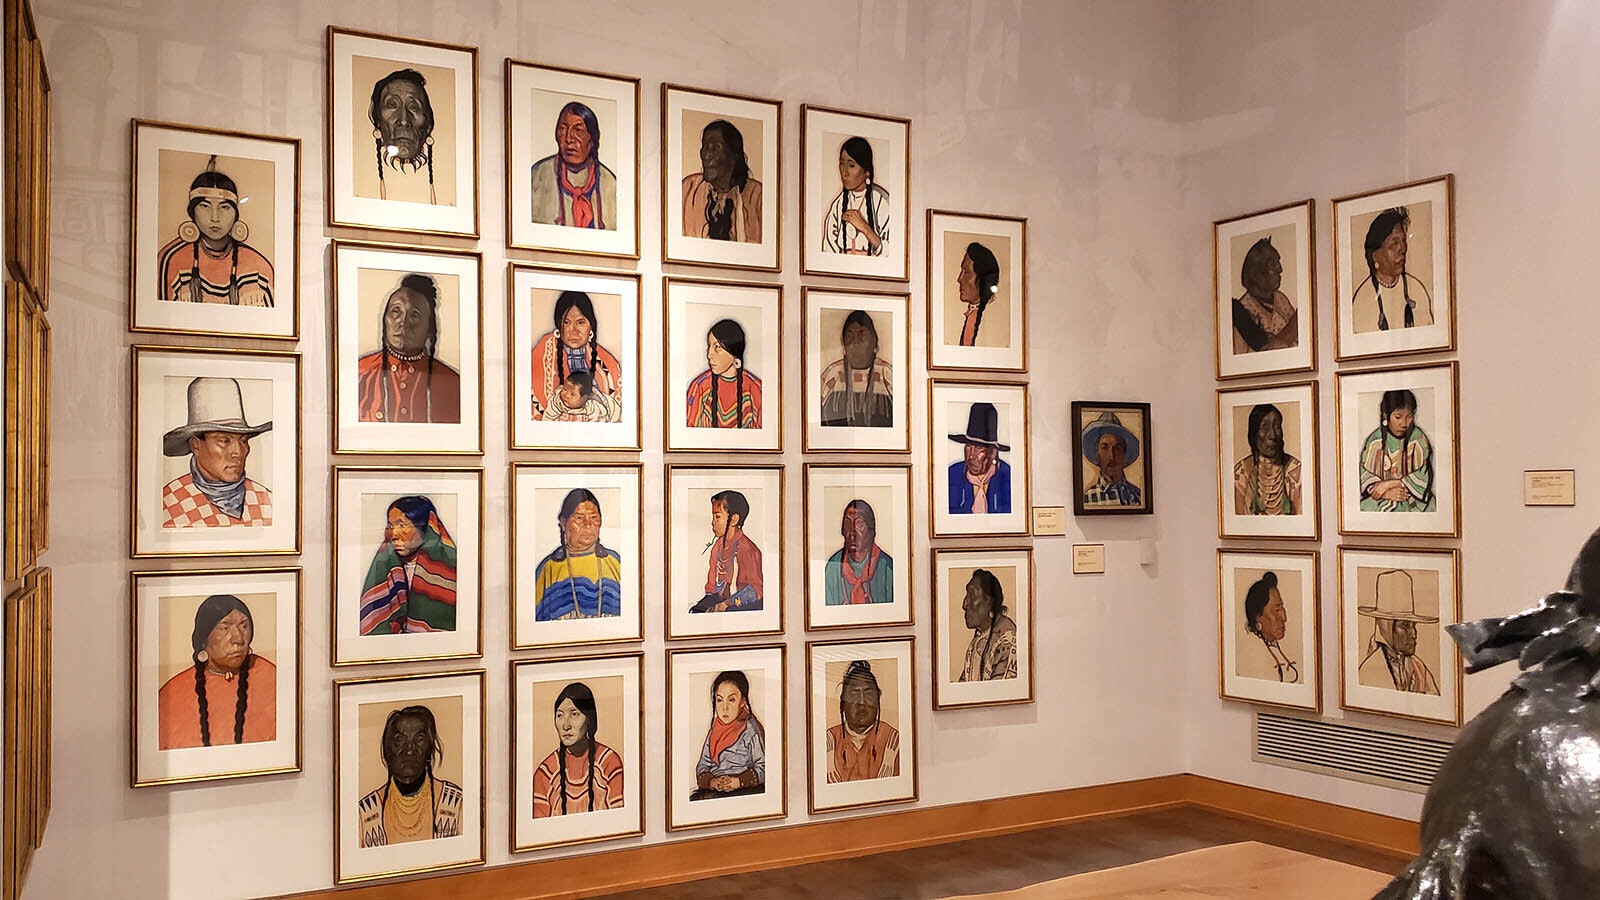 Portraits of American Indians, some of them by Standing Bear, a contemporary of famous spiritual leader Black Elk.